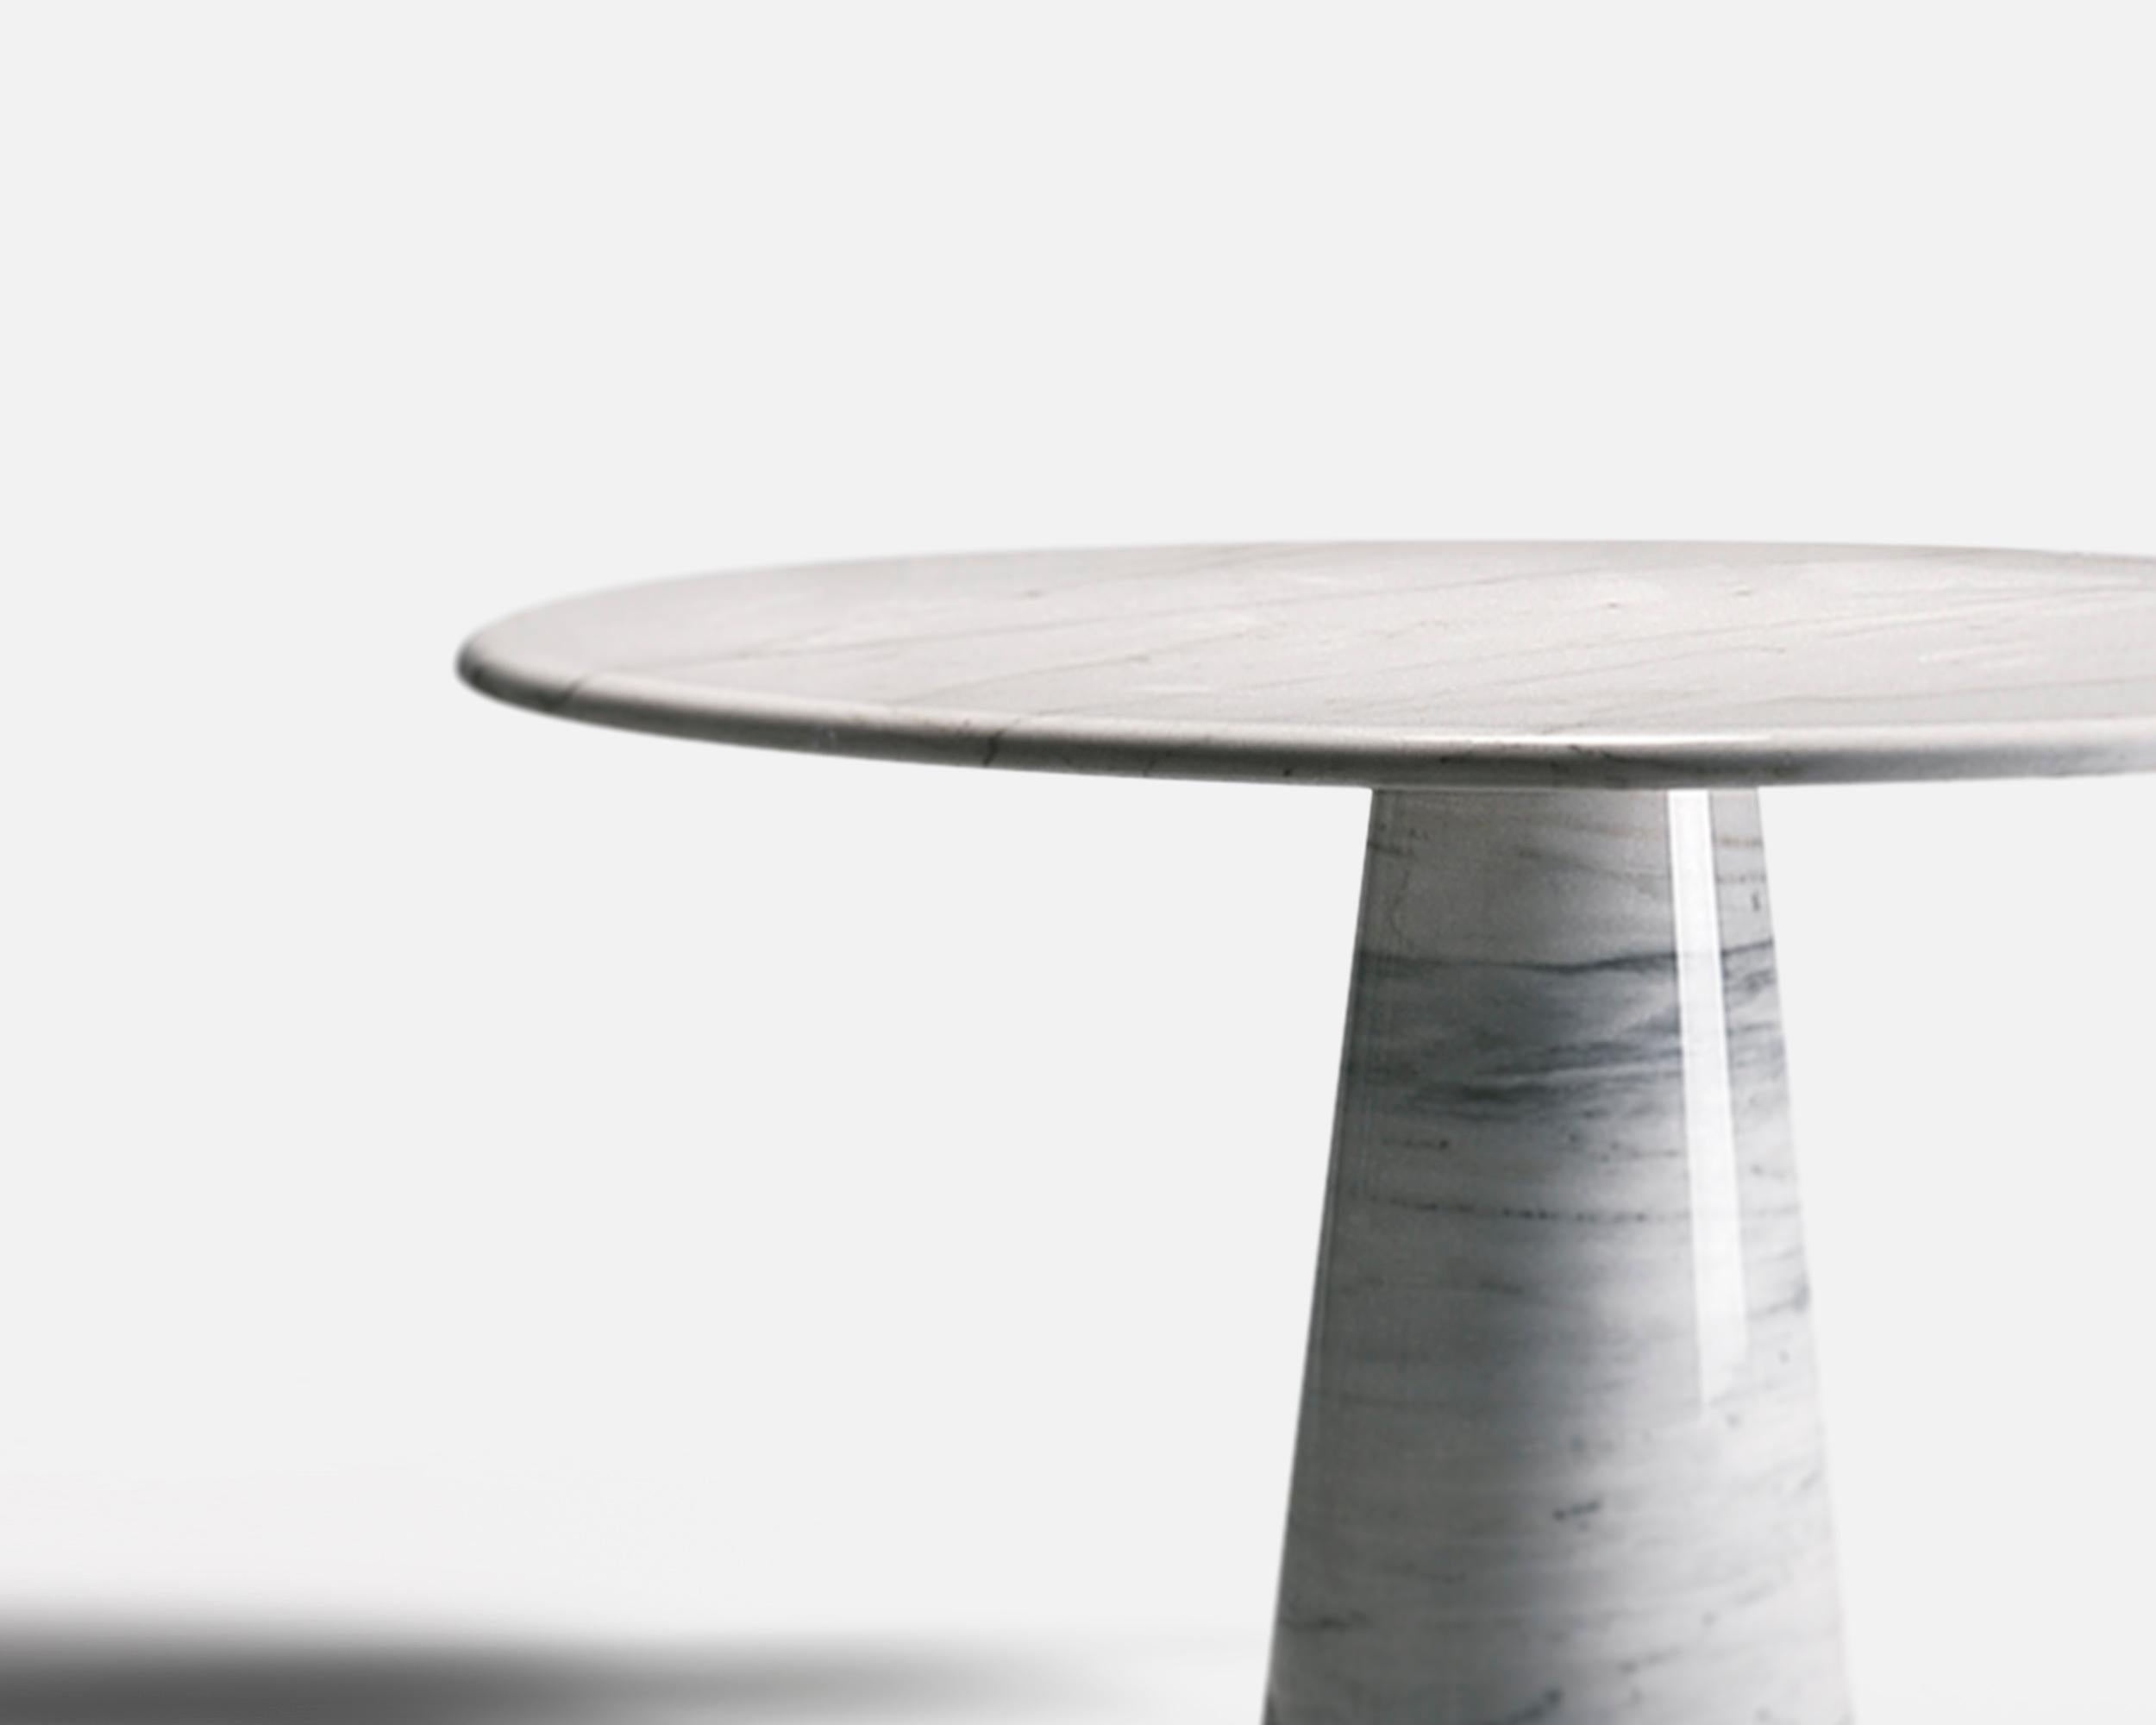 'Colonnata' round dining table in silver travertine
Design by Pier Alessandro Giusti & Egidio Di Rosa.
1970s

Dimensions: H. 72cm, D. 160cm
Material: marble, travertine, (wide range of stone types available)

Customization: 
This table is